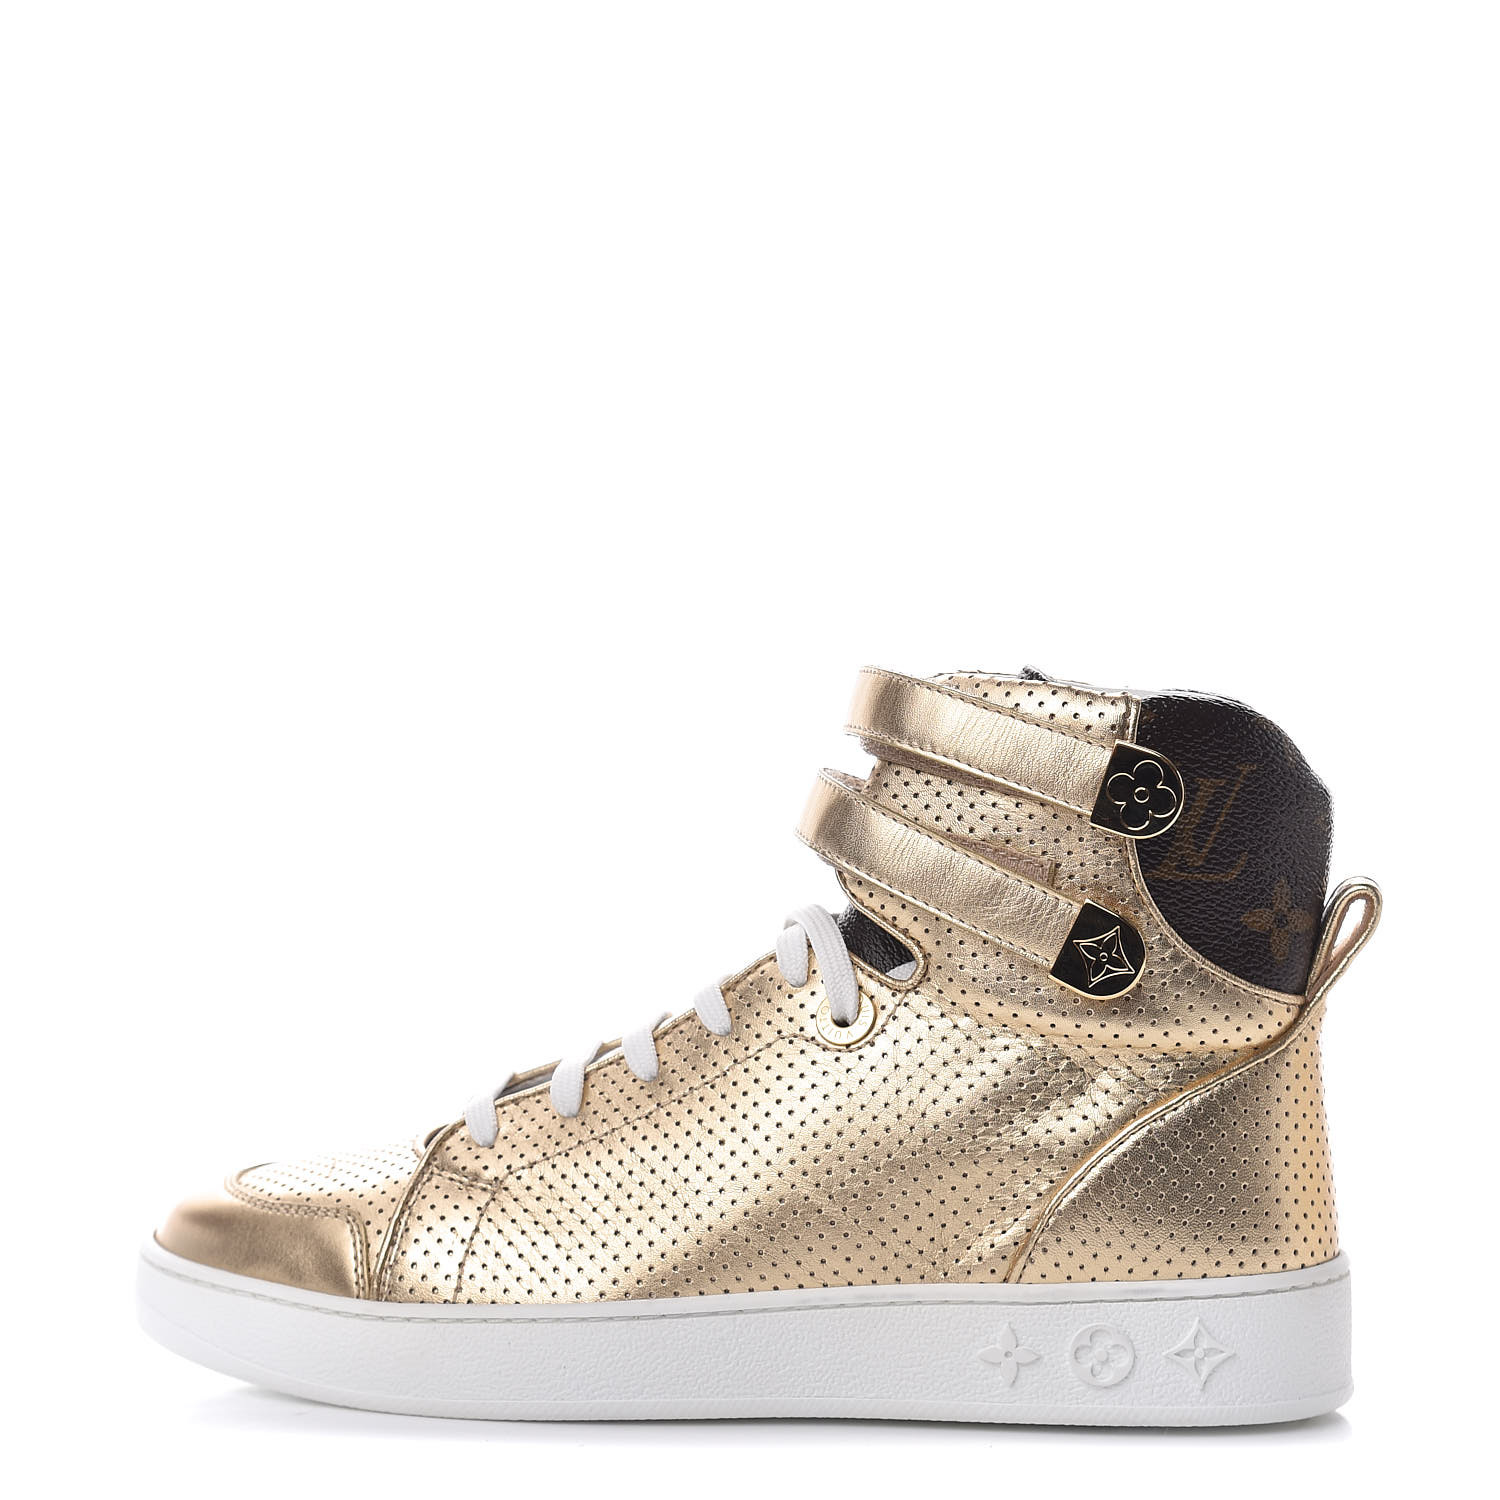 gold high top sneakers womens